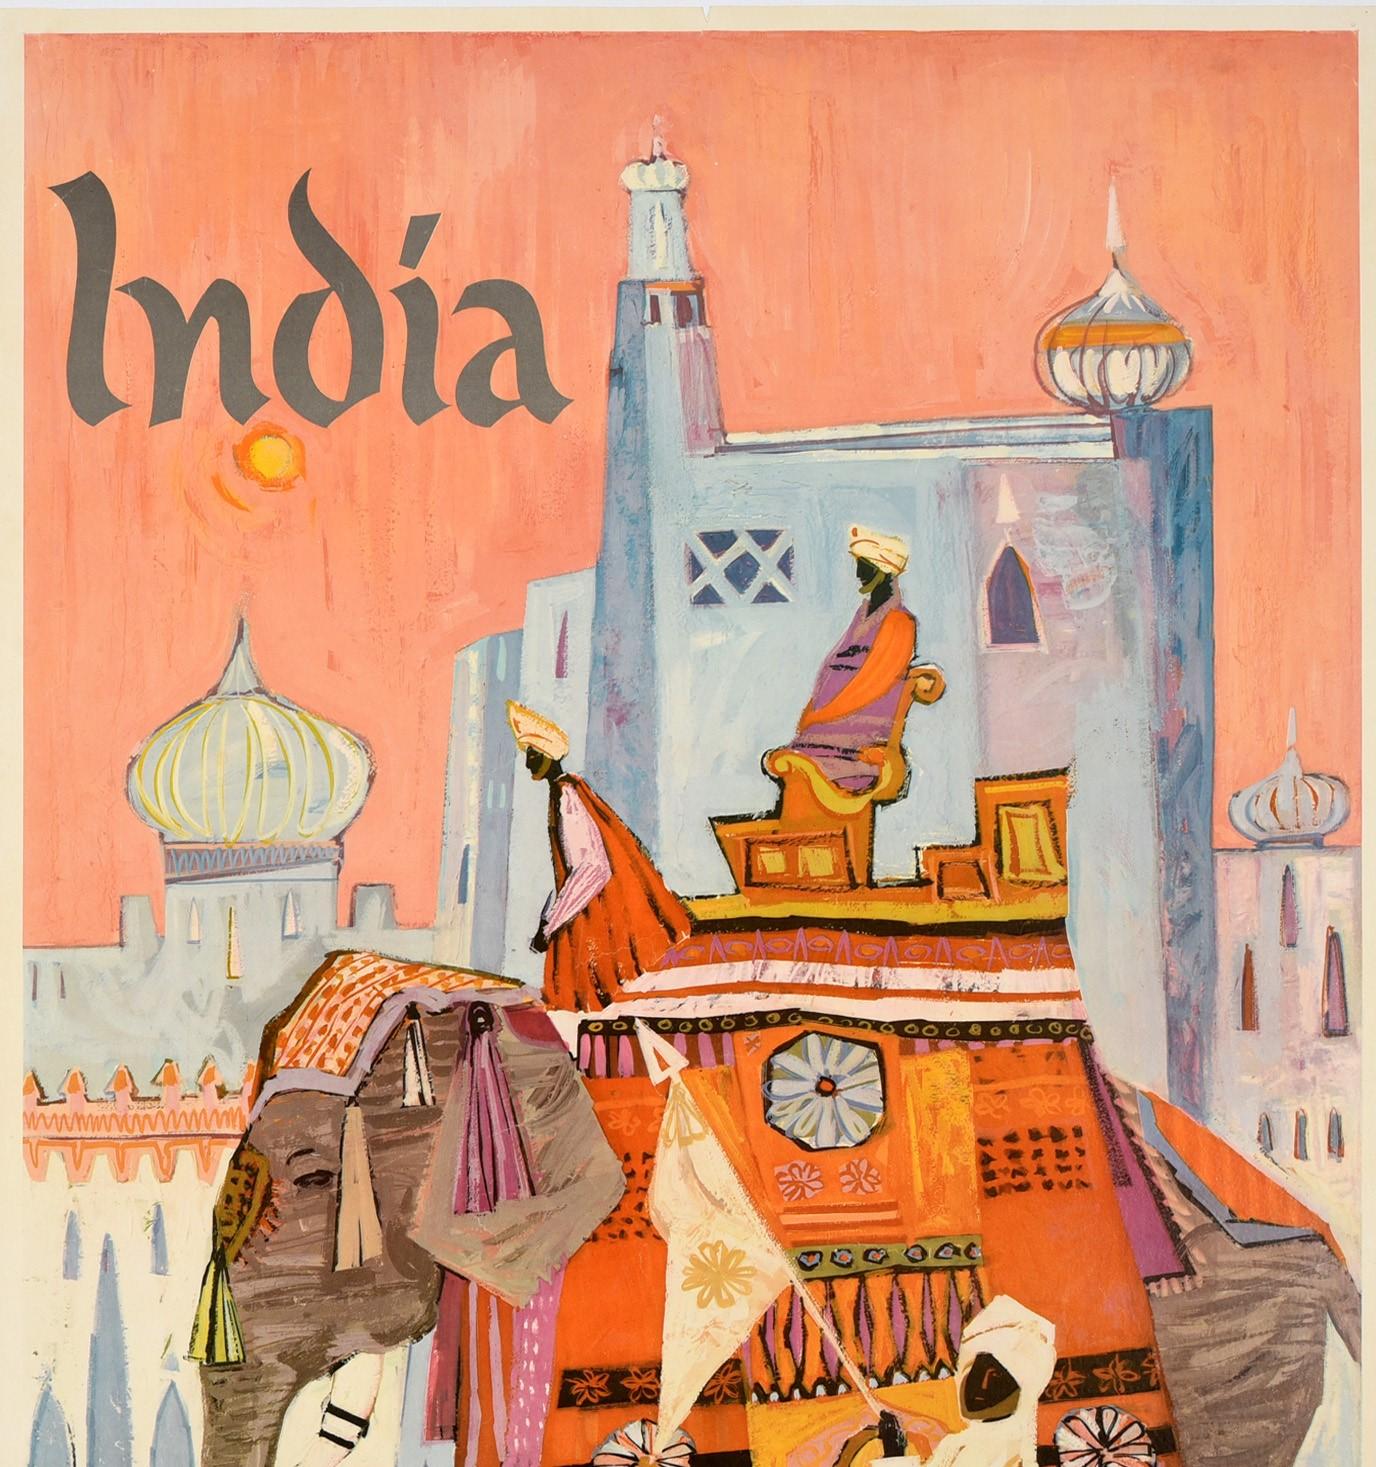 Original Vintage Travel Poster For India Feat. Colourful Regal Elephant Howdah - Print by S Hall